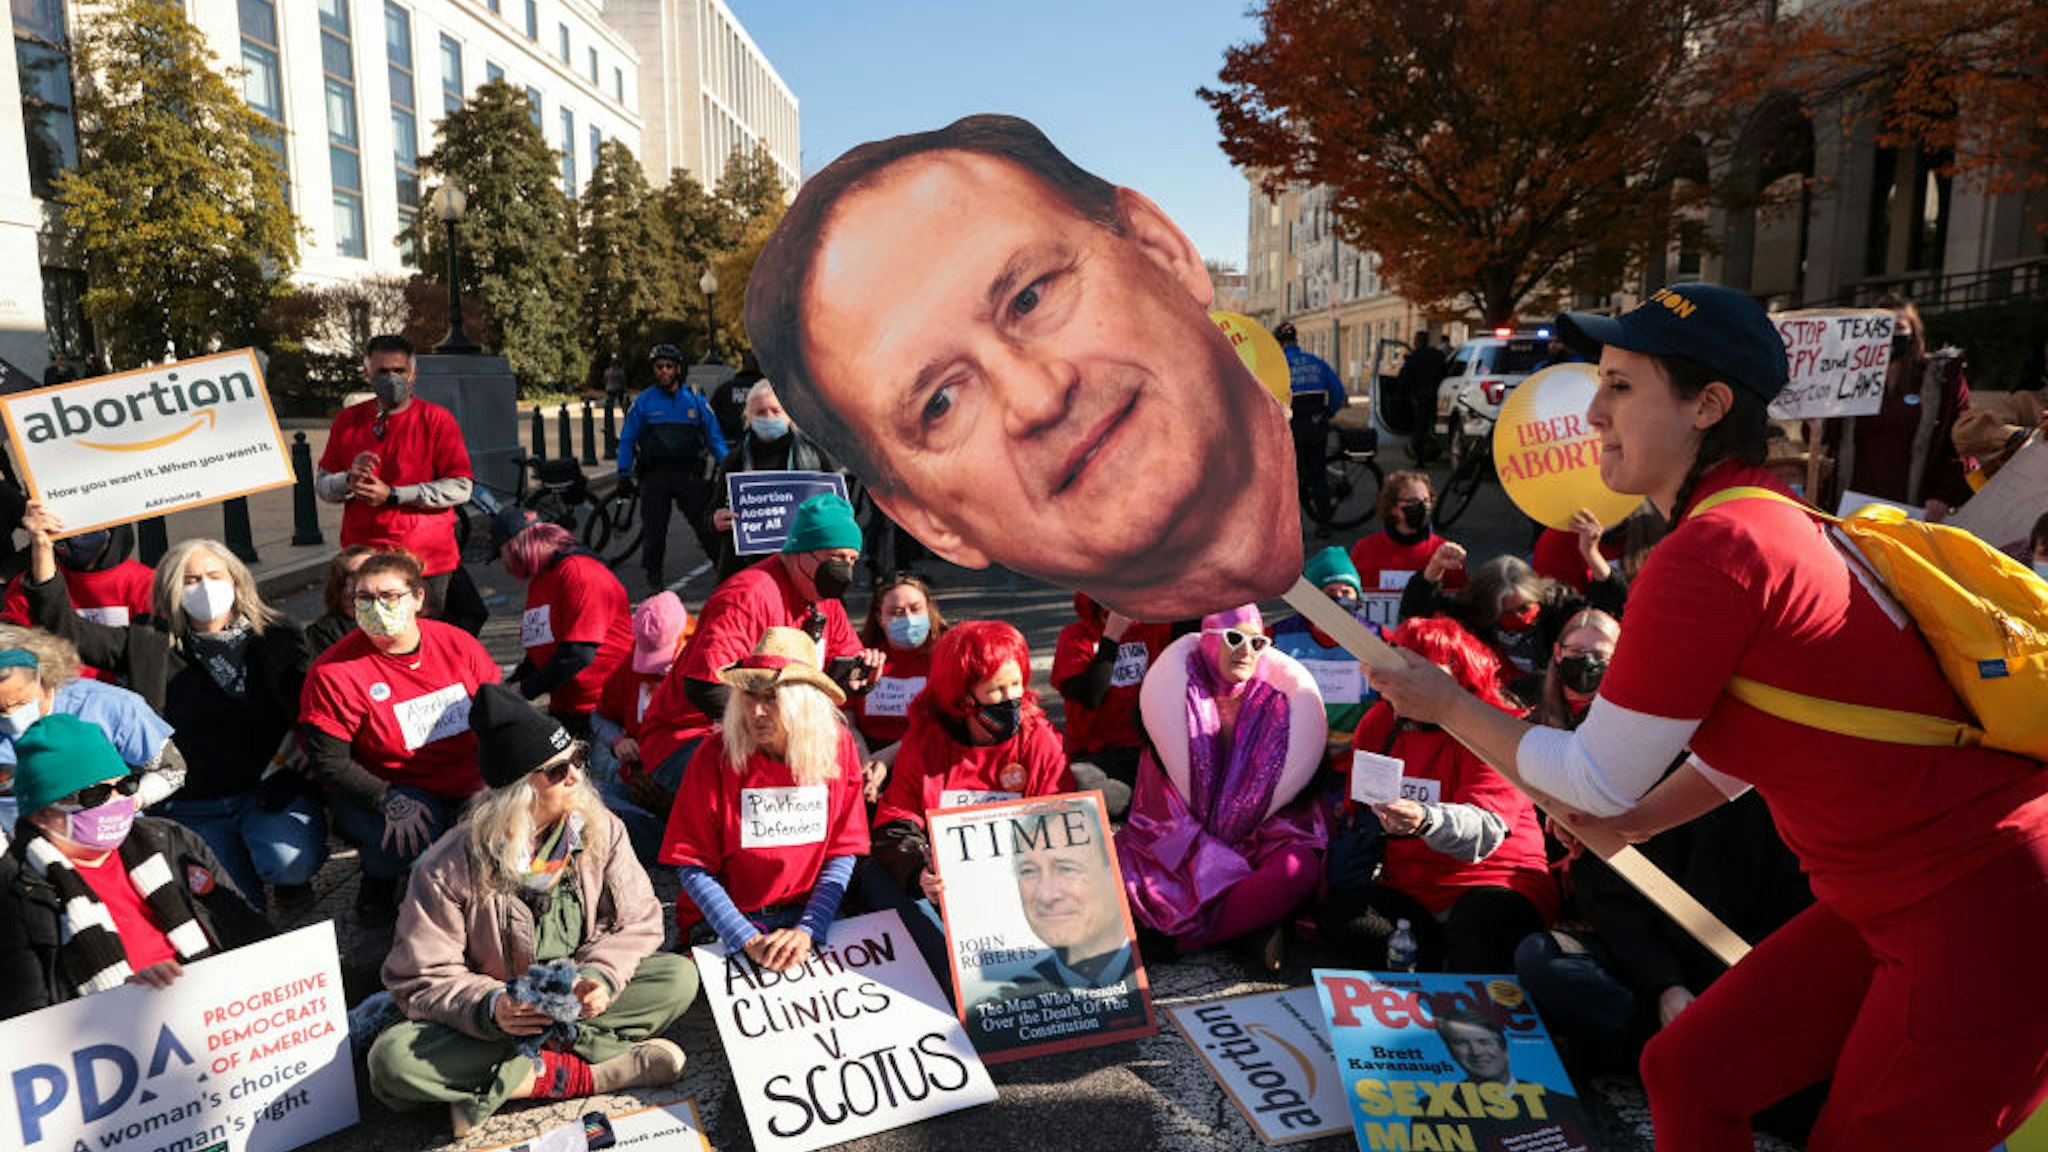 Supreme Court Justice Samuel Alito has been targeted by protesters since his draft opinion overturning Roe v Wade was leaked